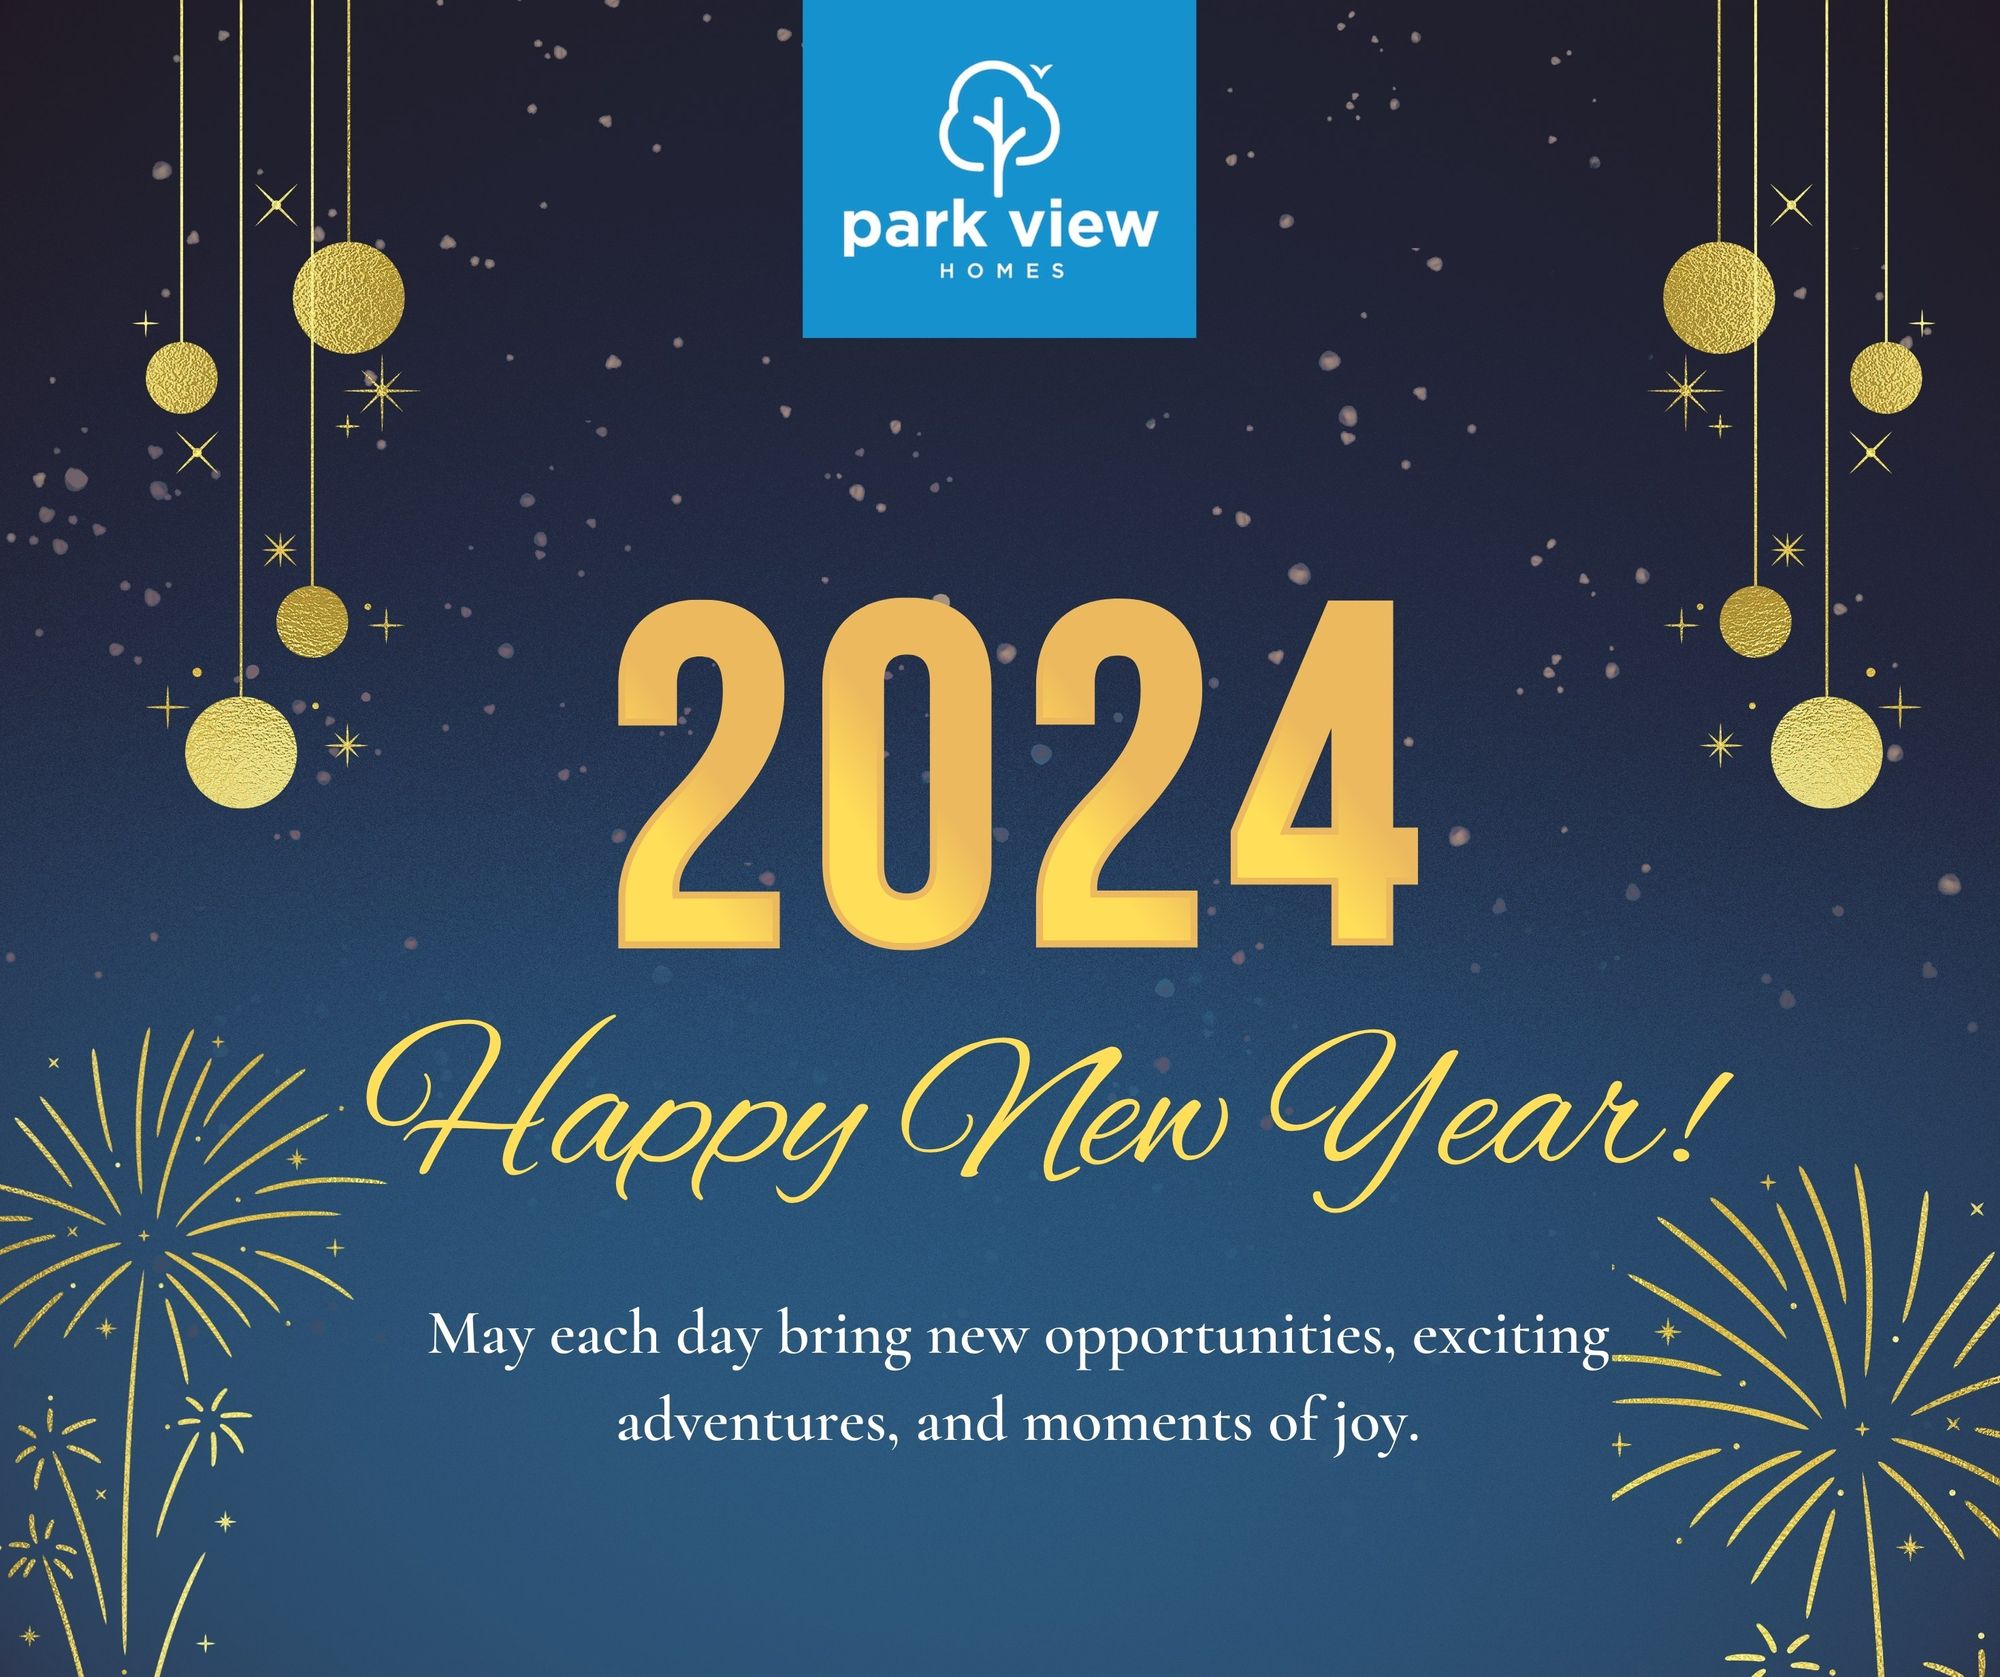 🎉 Happy New Year from Park View Homes! 🌟